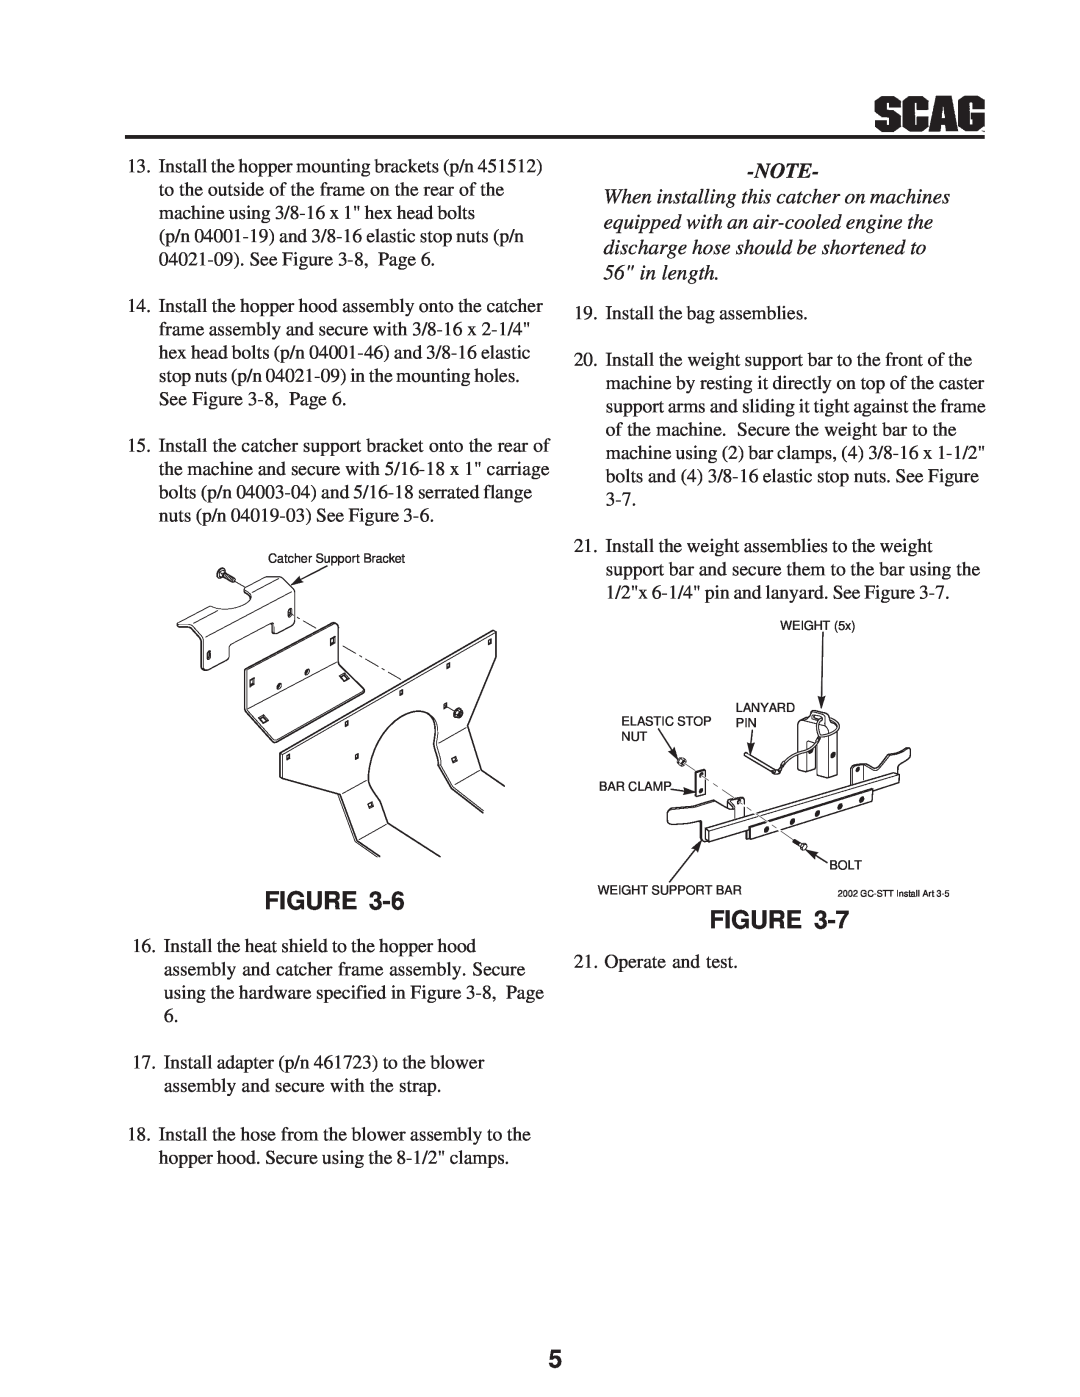 Scag Power Equipment GC-STT-V operating instructions Install the hose from the blower assembly to the 